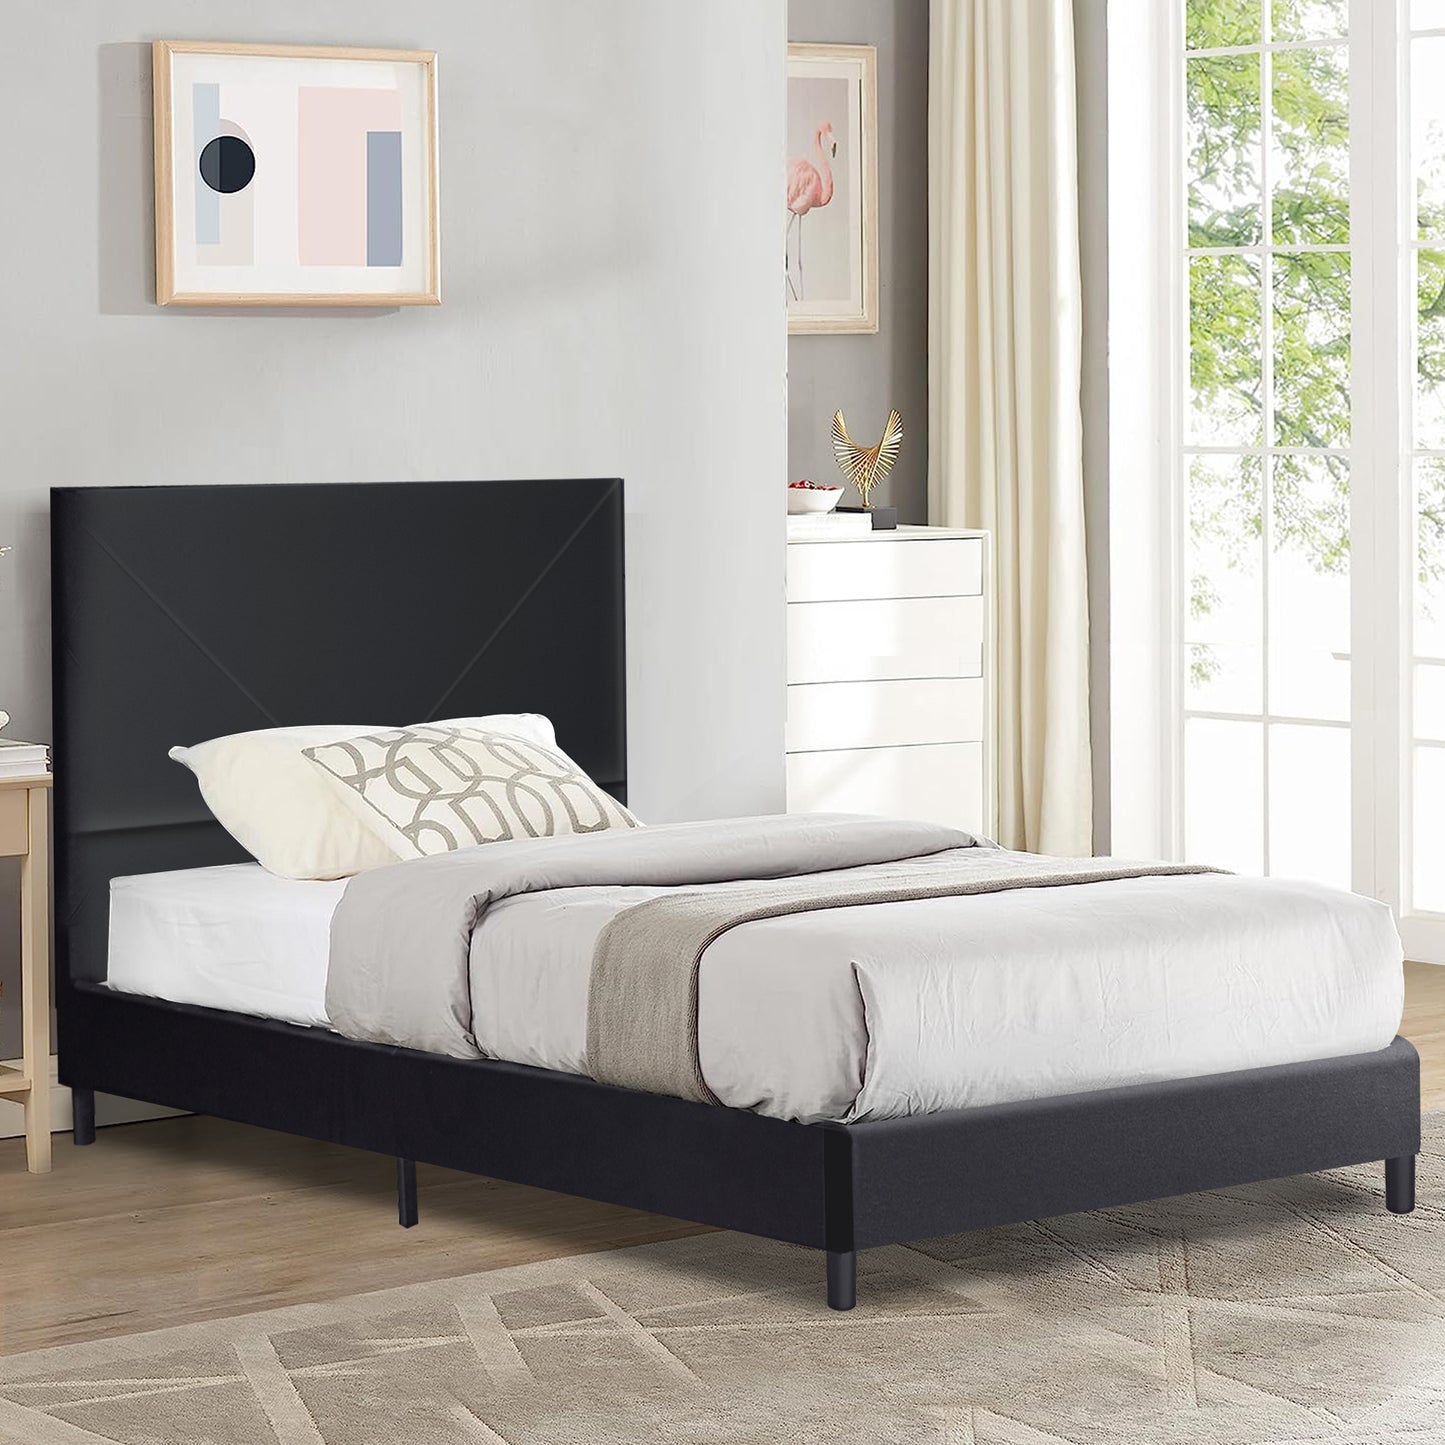 SYNGAR Black Upholstered Velvet Platform Bed Frame Queen Size with Elegant Headboard, Sturdy Frame Bedroom Furniture with Strong Wooden Slat Support, 800LBS Weight Capacity